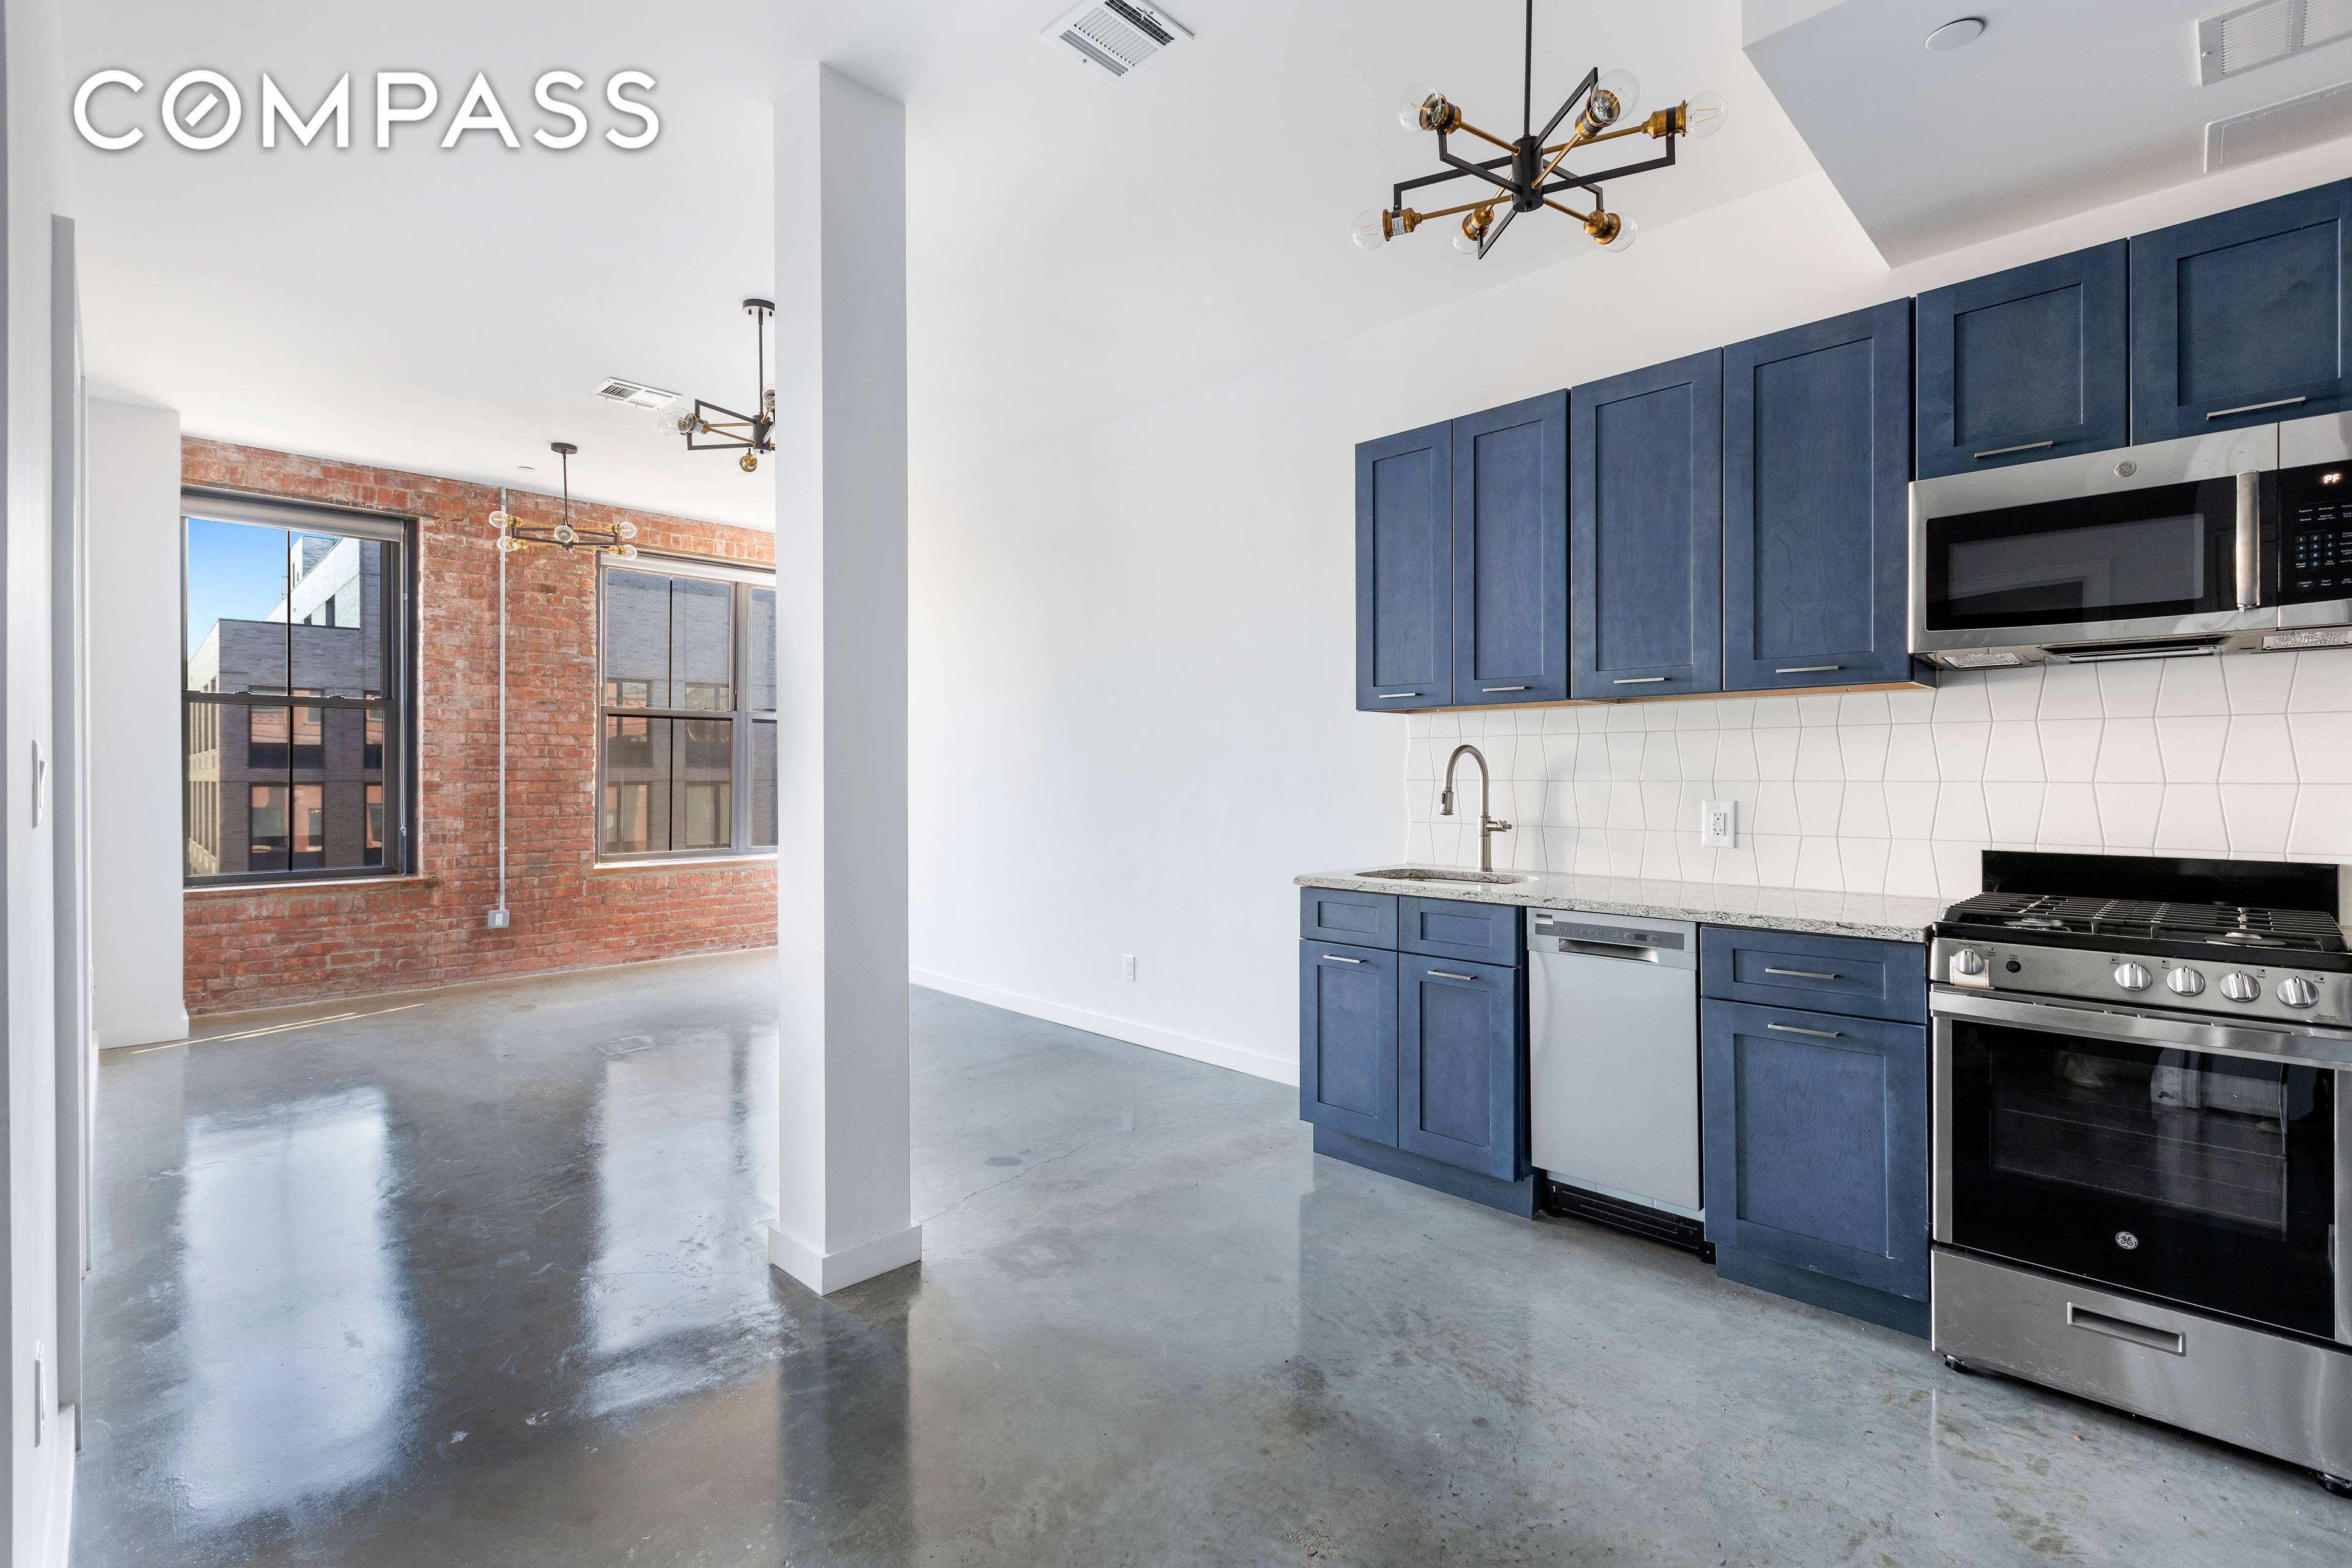 Authentic Williamsburg Northside loft with 2 large bedrooms, 2 full bathrooms in unit W D and tons of natural light.